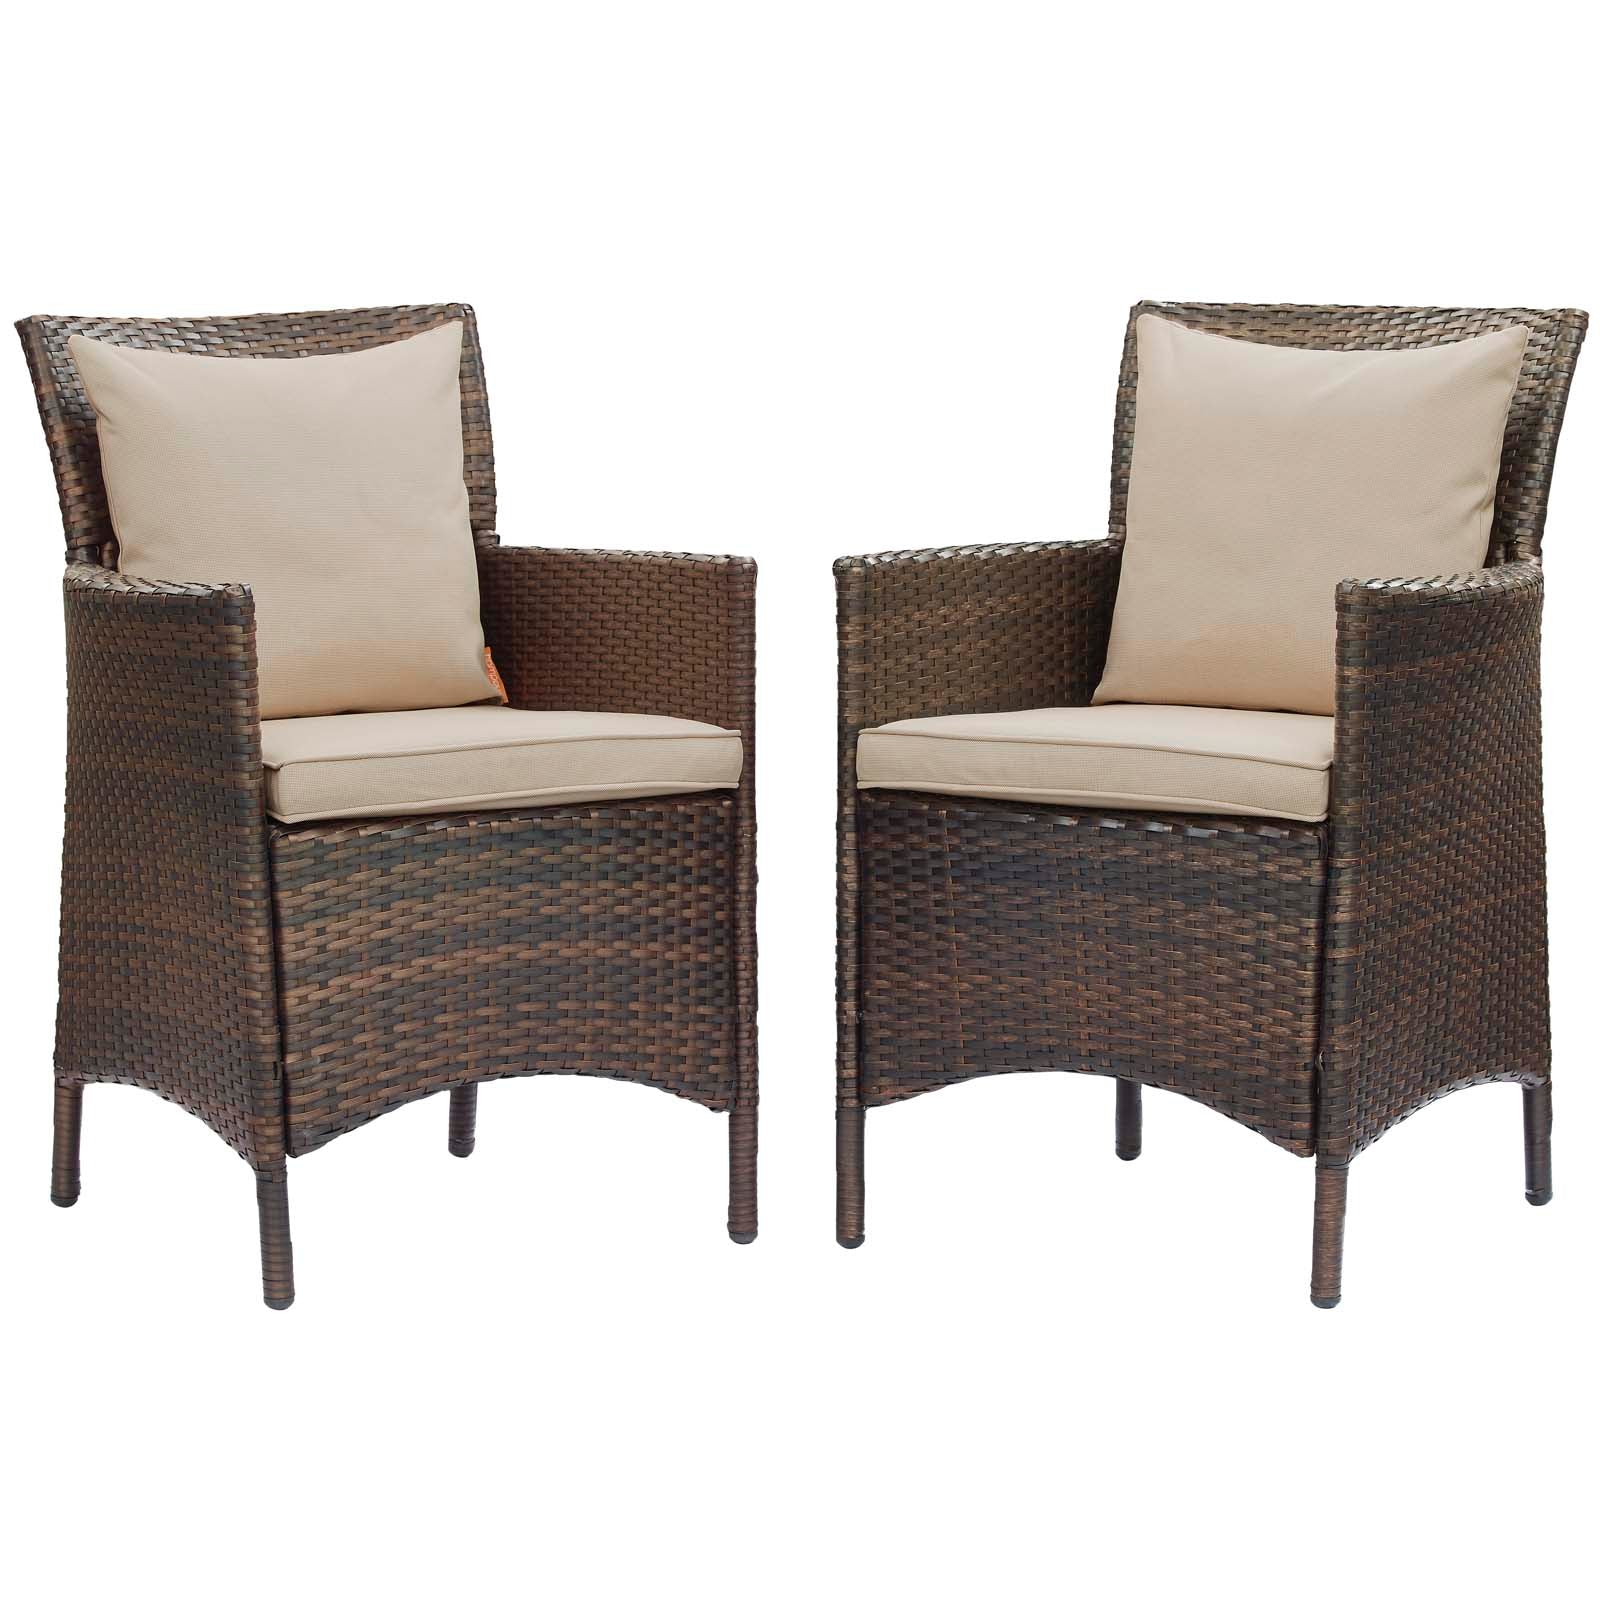 Modway Outdoor Dining Chairs - Conduit Outdoor Patio Wicker Rattan Dining Armchair Set of 2 Brown Beige